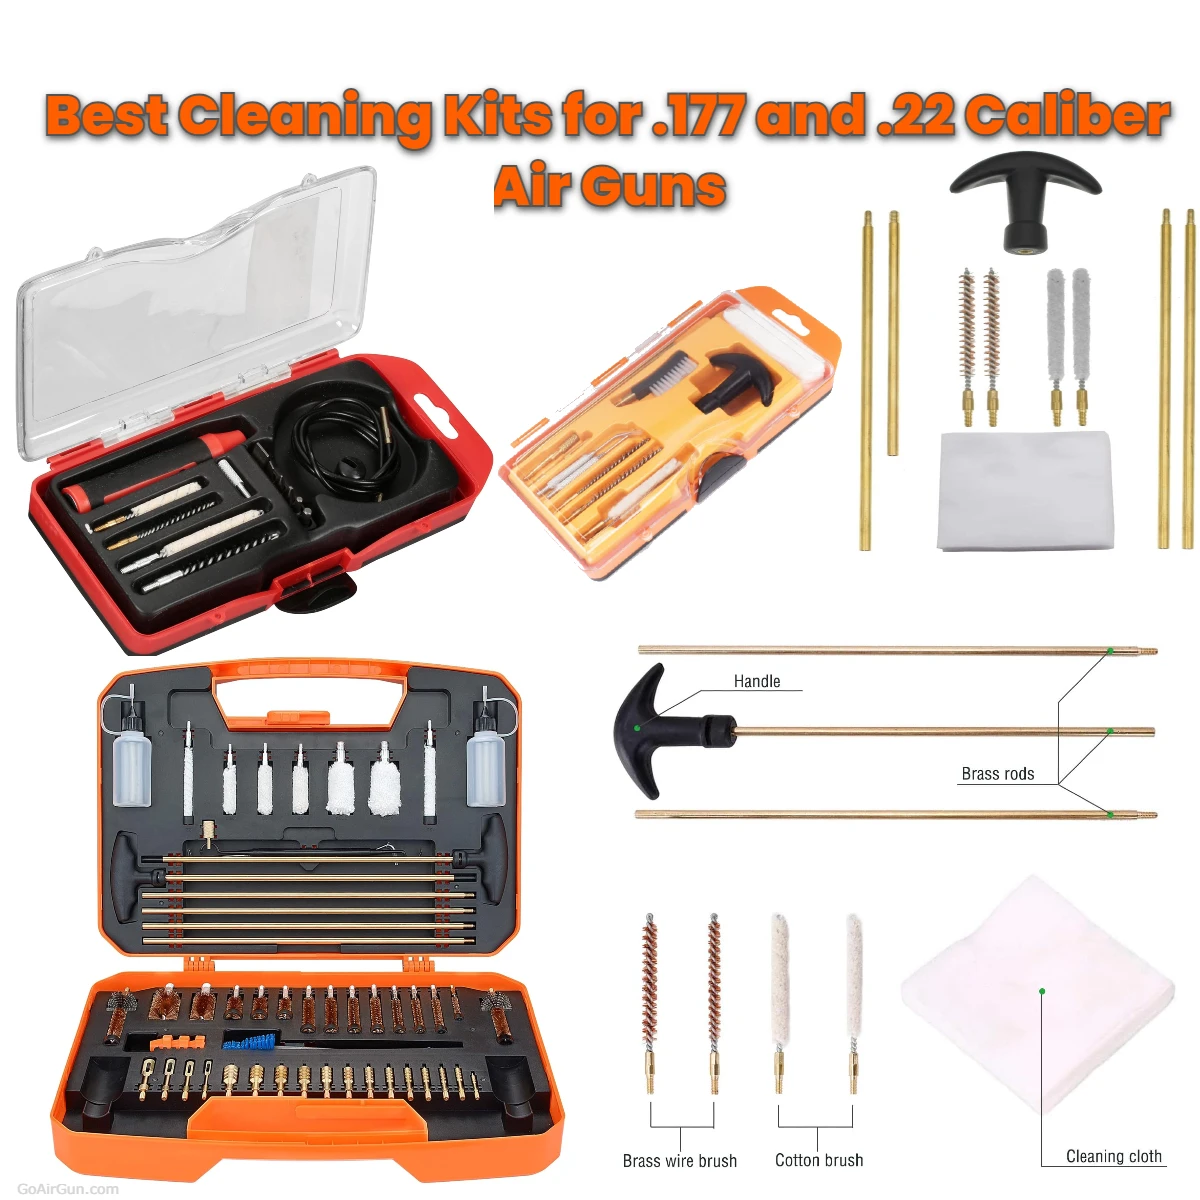 Cleaning Kits for .177 and .22 Caliber Air Guns